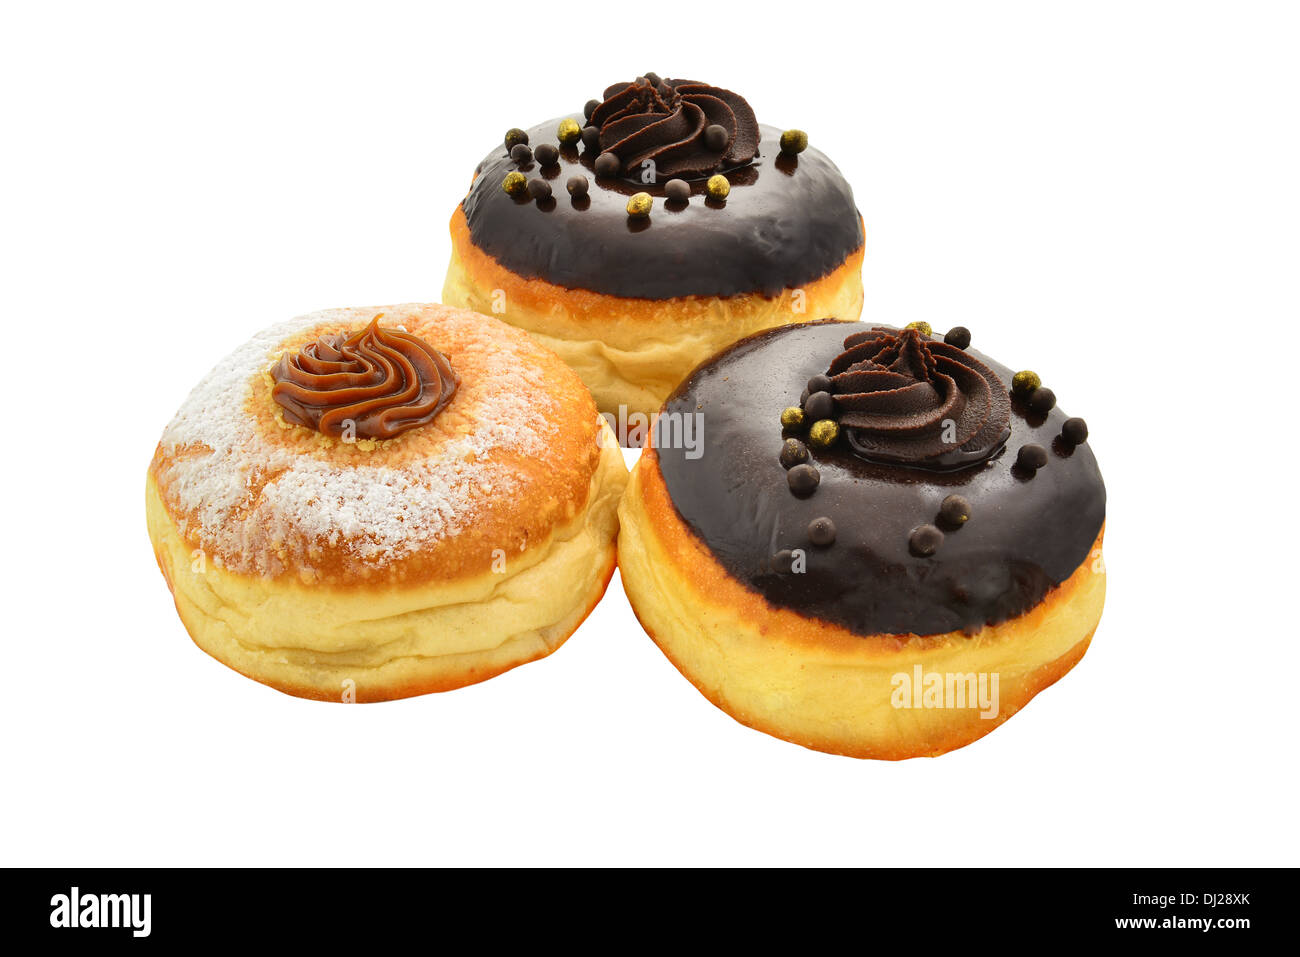 Sufganiyot - donuts for Hanukkah. With black chocolate and dulce de leche. Stock Photo